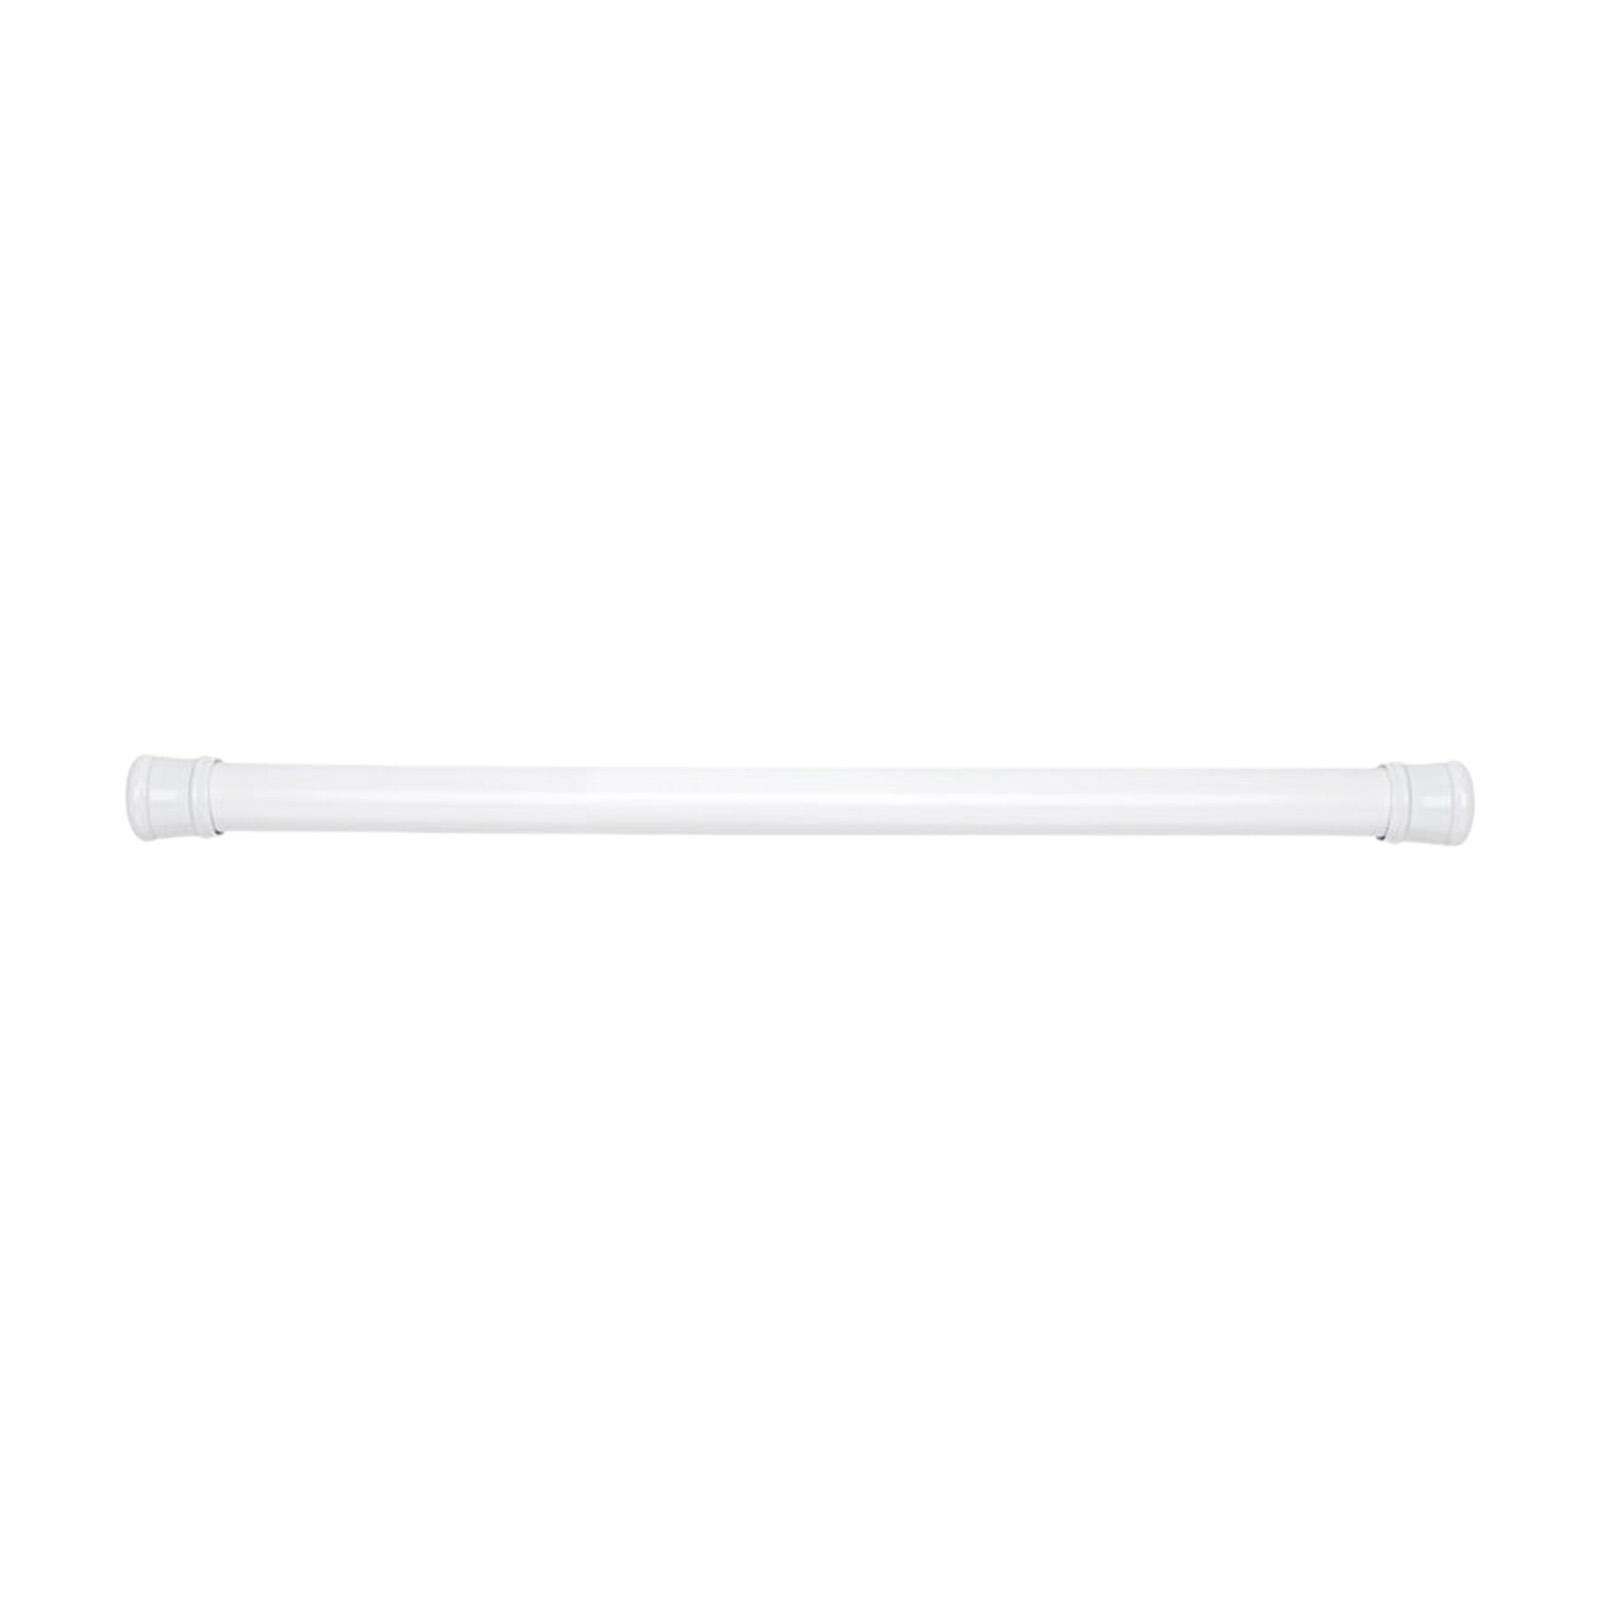 Shower Curtain Rod No Drill Telescopic Durable Closet Rods Multipurpose 2.5cm Diameter Rod Metal Material Extendable for Laundry Room, Patio